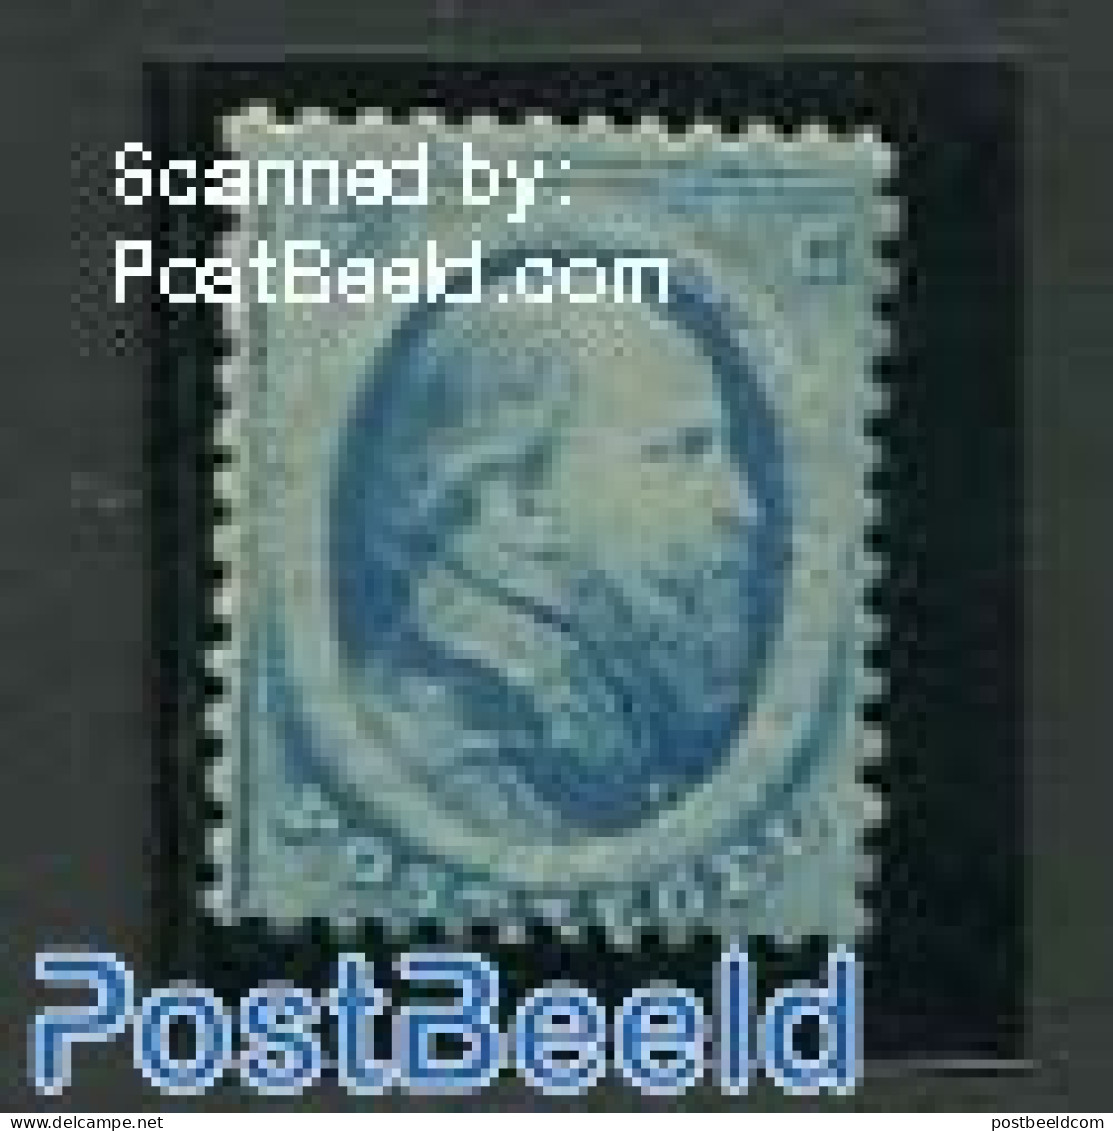 Netherlands 1864 4c, Stamp Out Of Set, Unused (hinged) - Nuevos